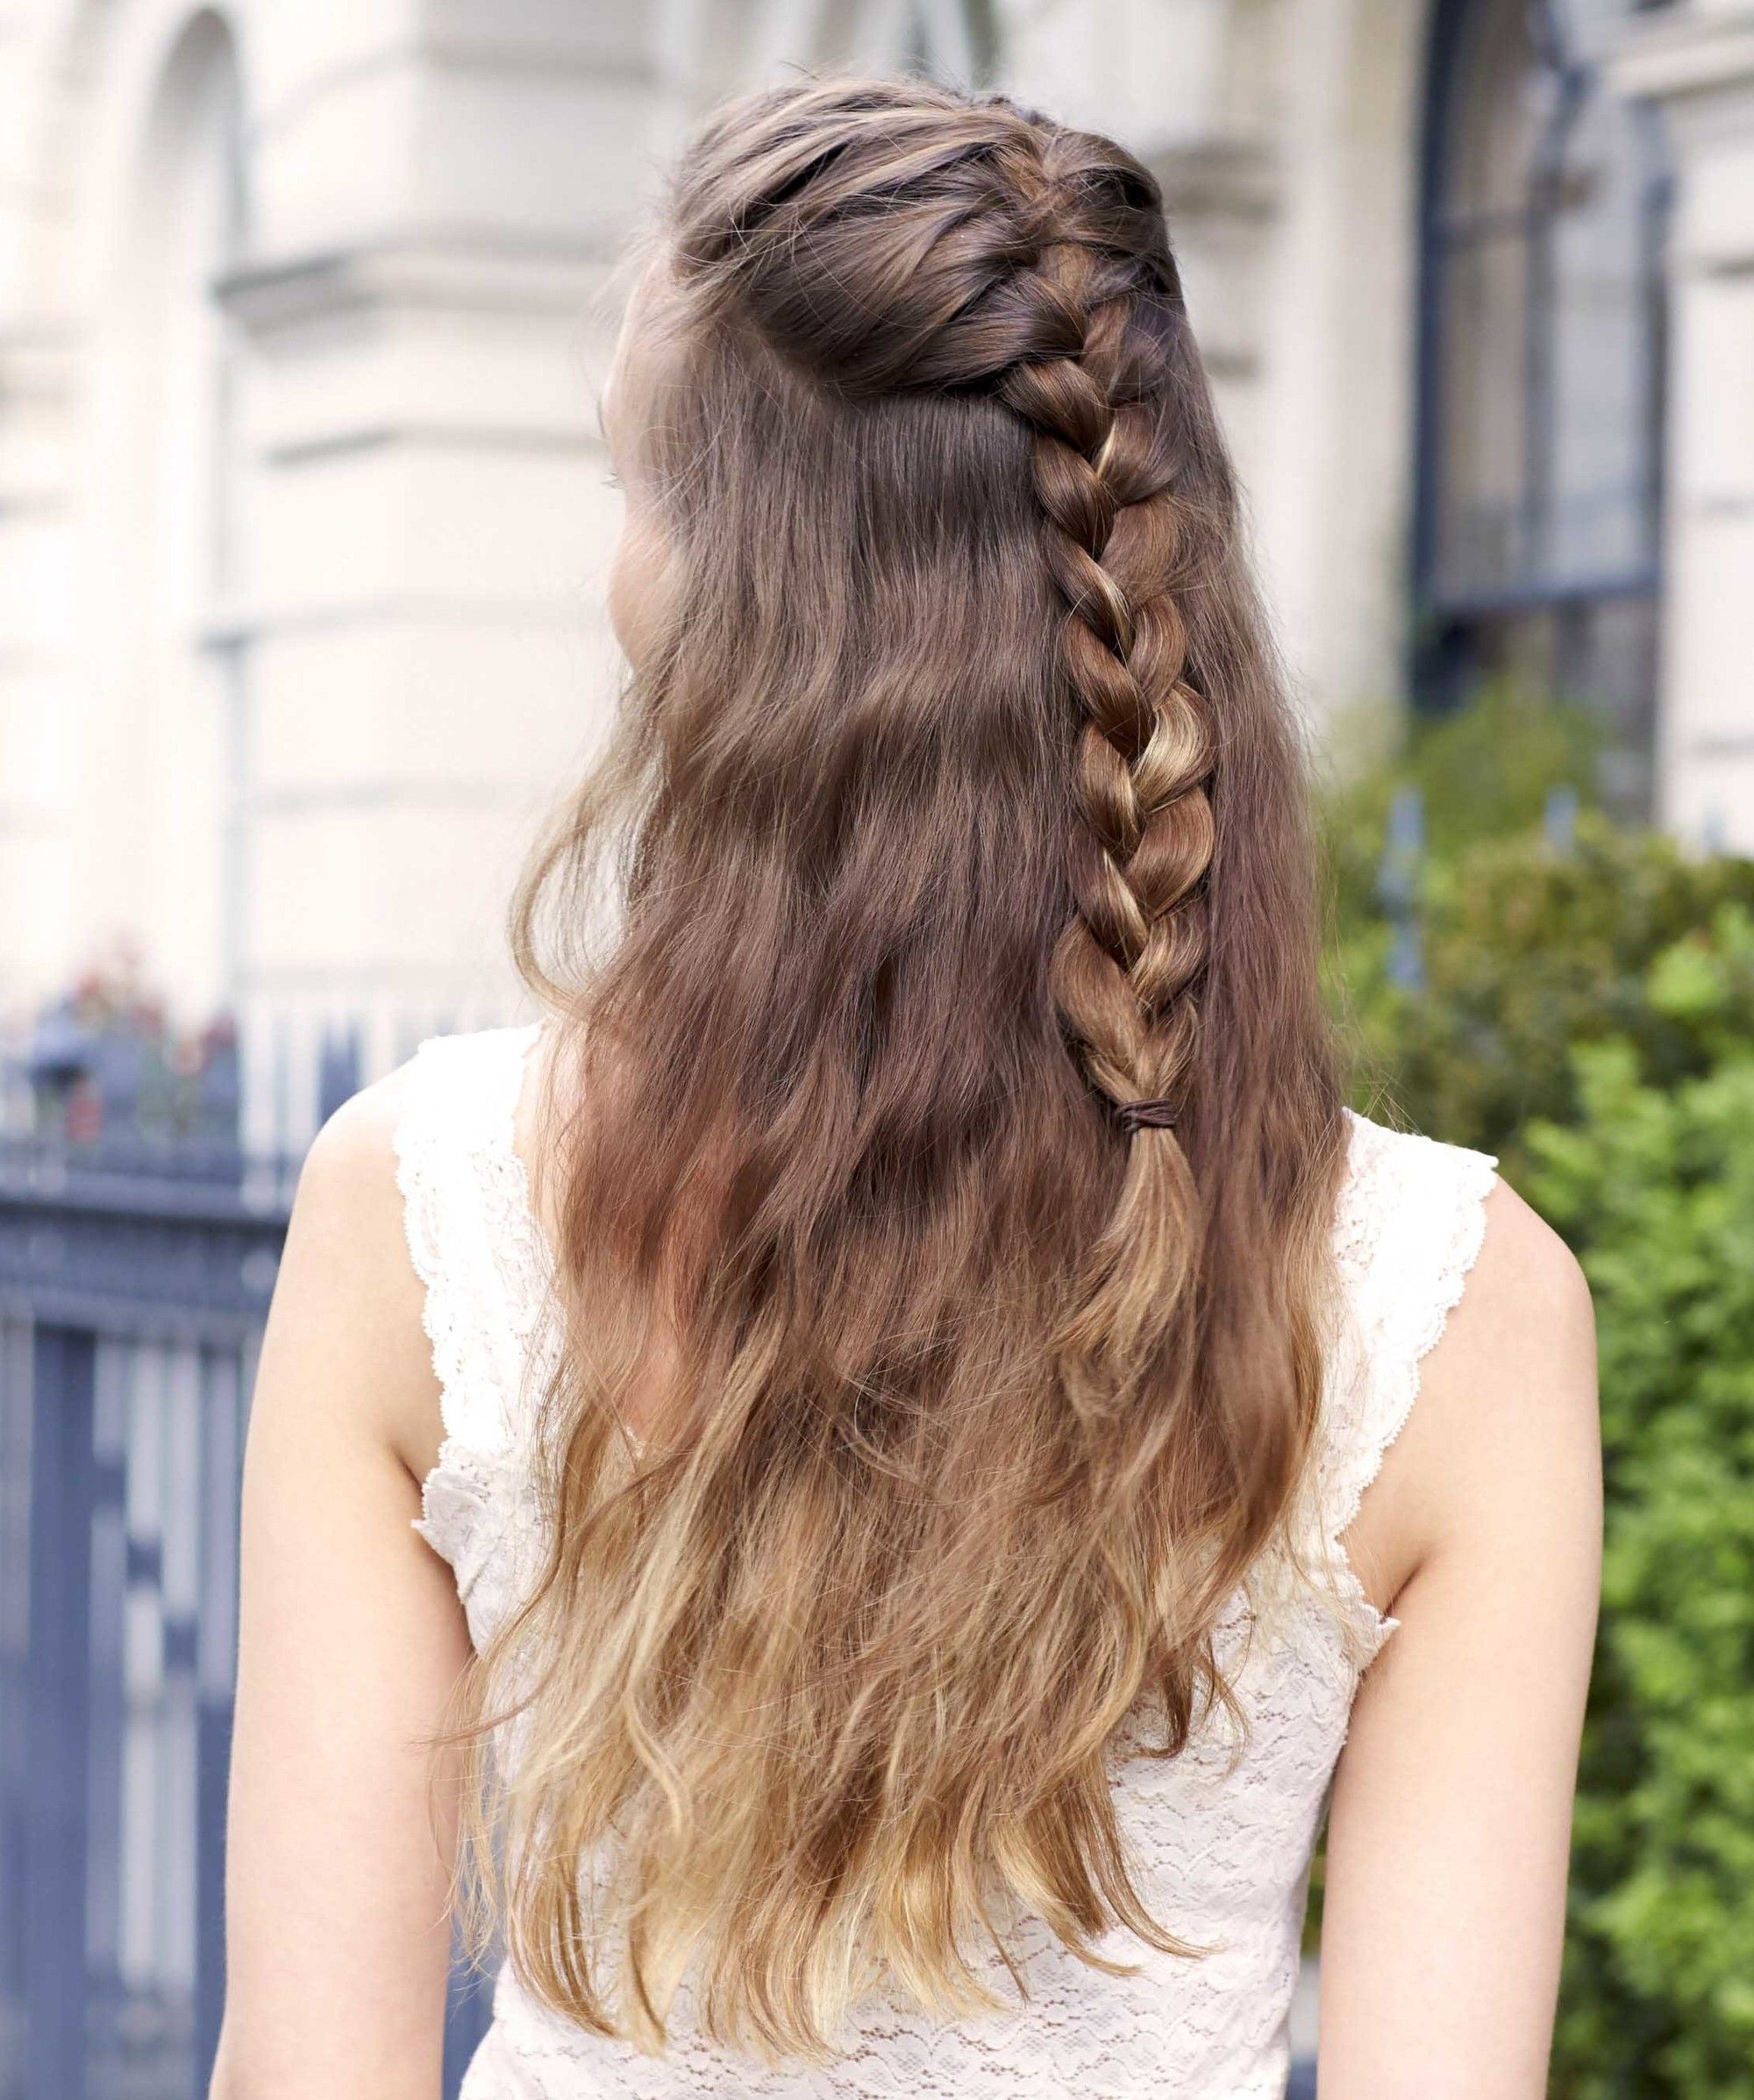 How to Style a Waterfall Braid